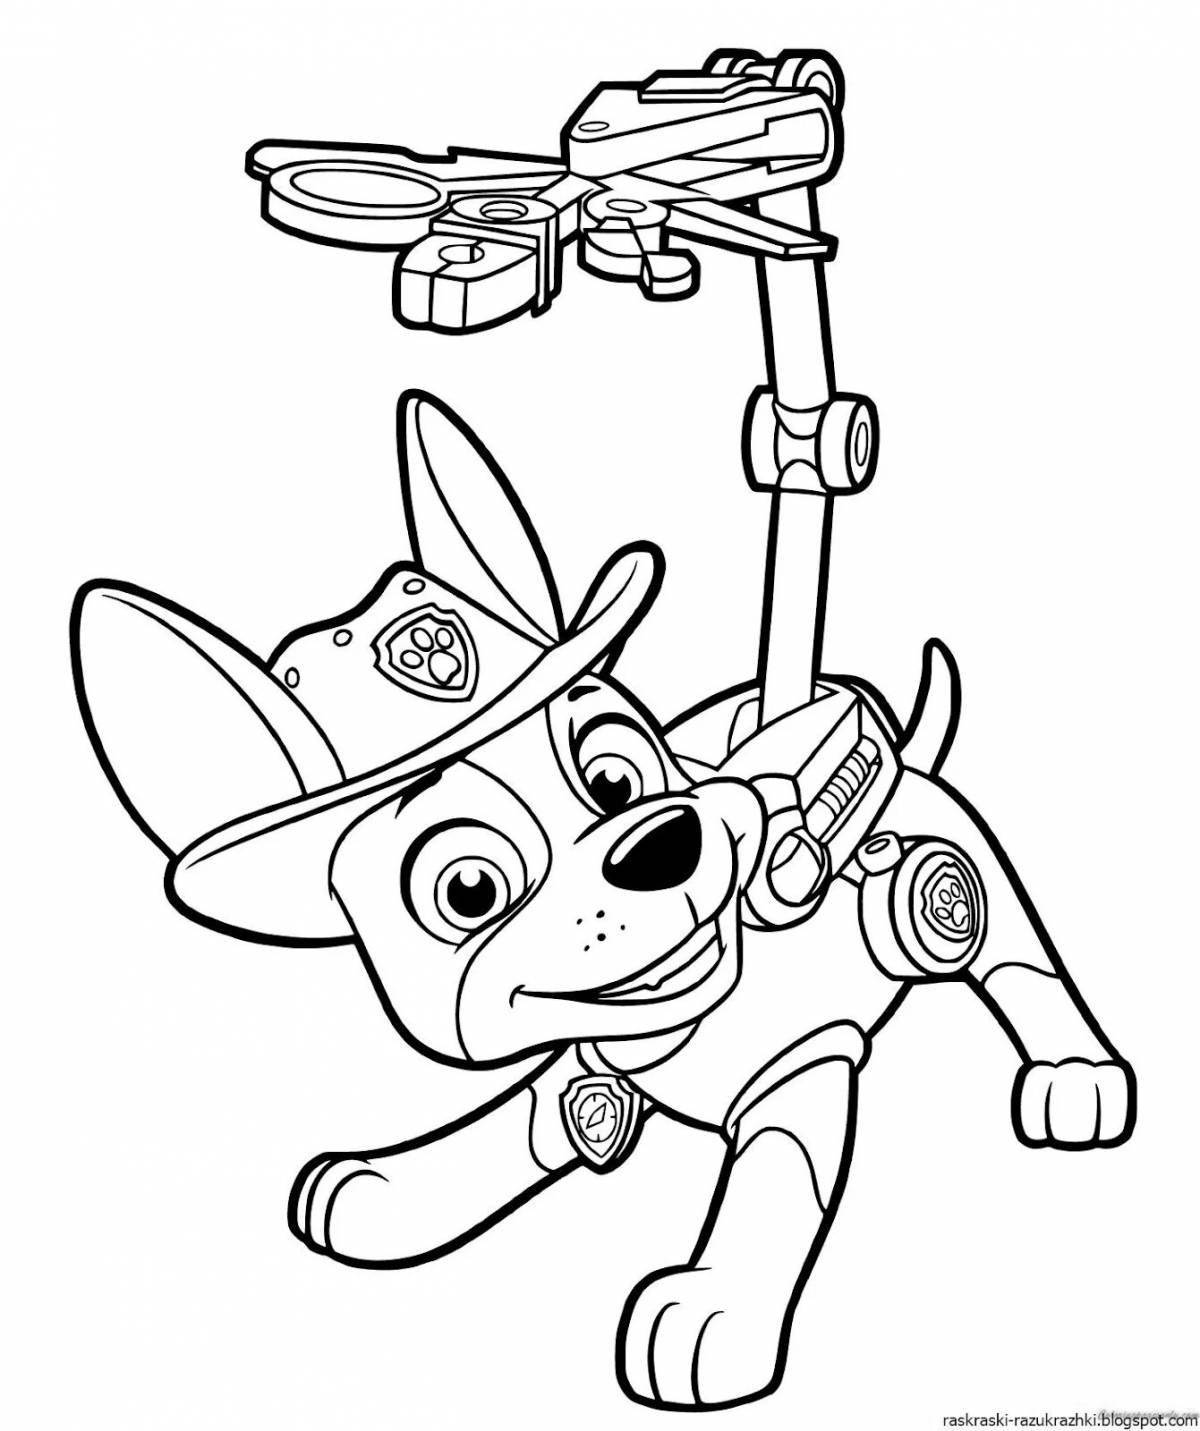 Exciting coloring page paw patrol for boys